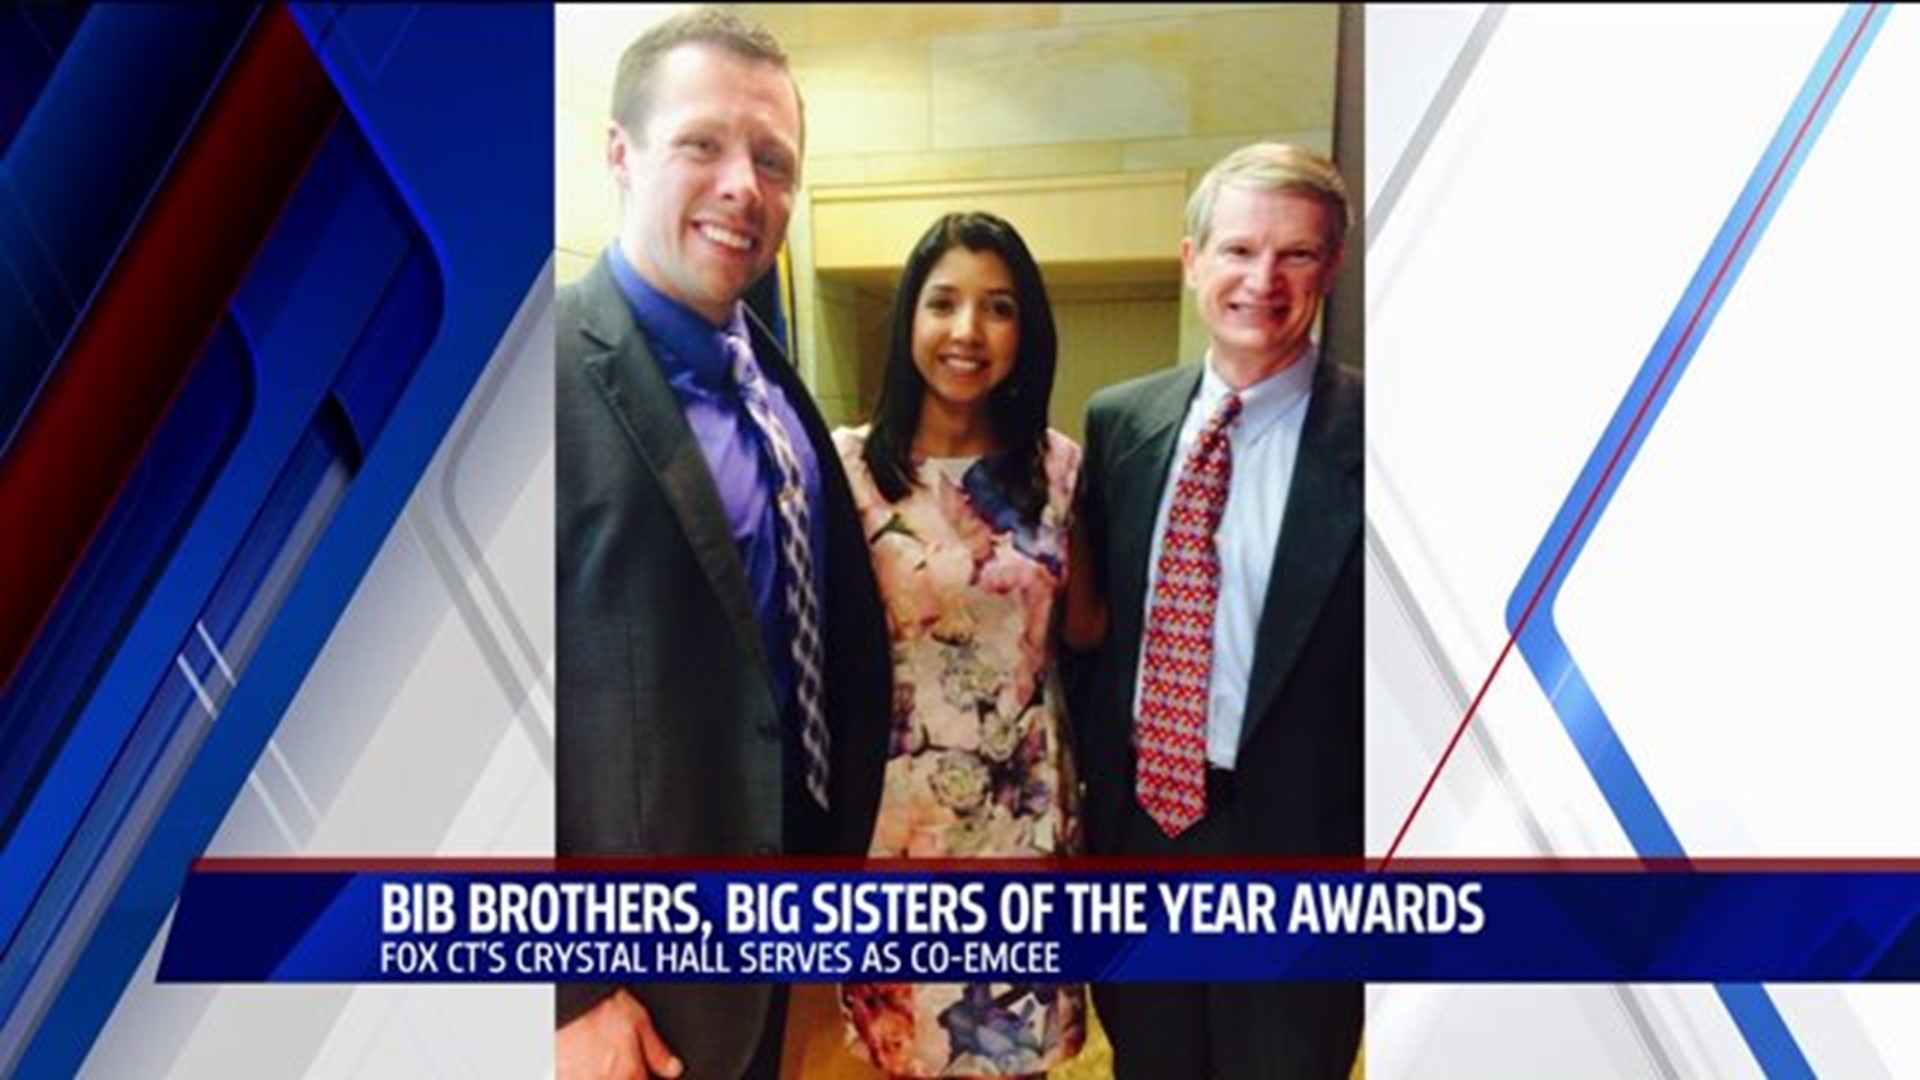 An awards ceremony was held for Big Brothers Big Sisters.